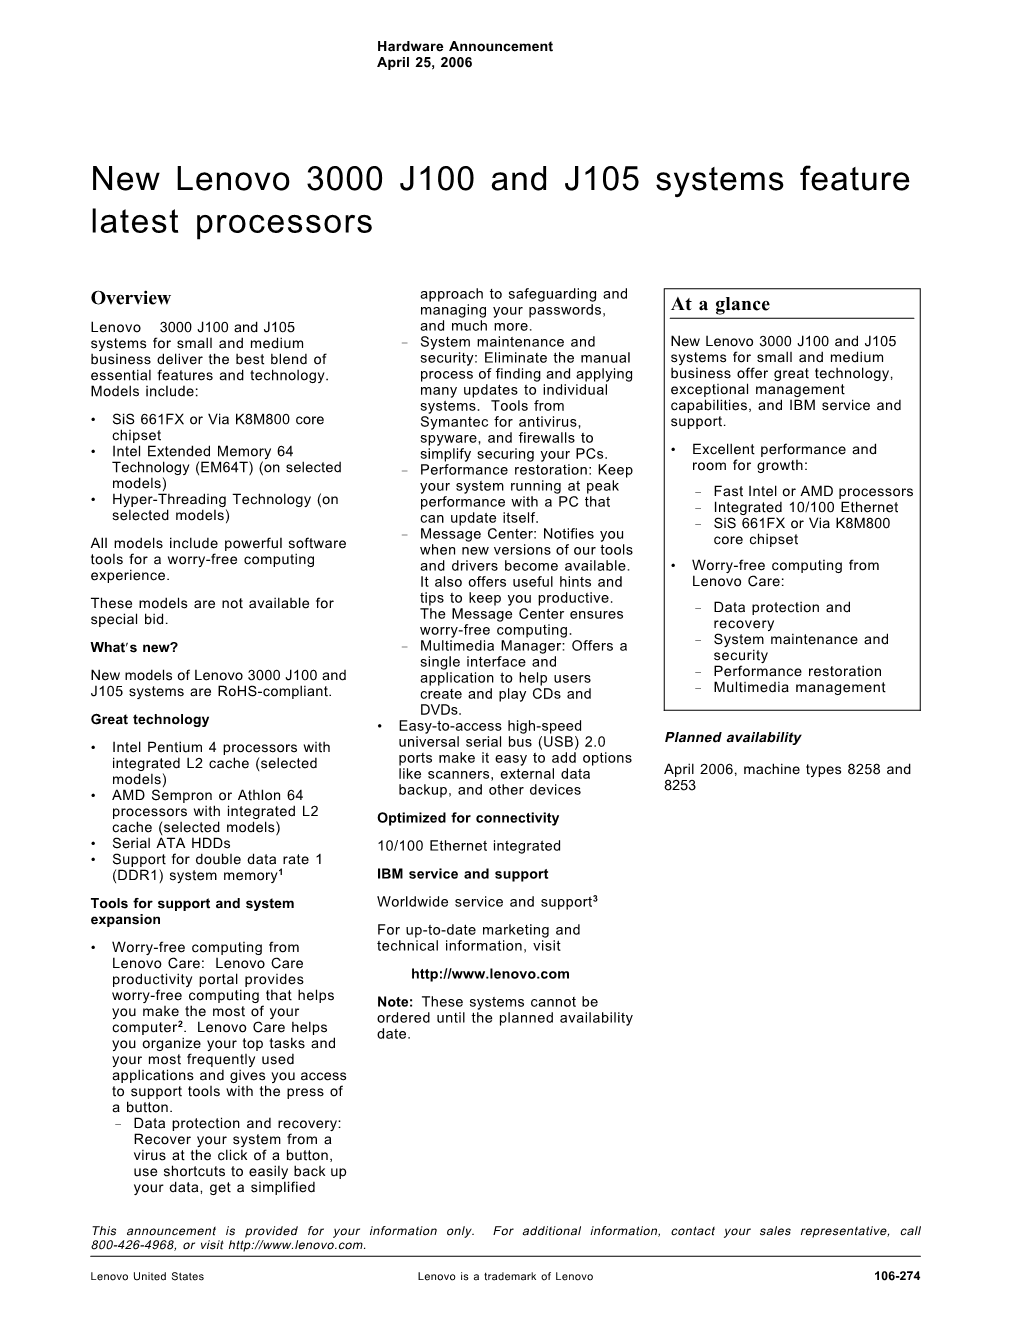 New Lenovo 3000 J100 and J105 Systems Feature Latest Processors